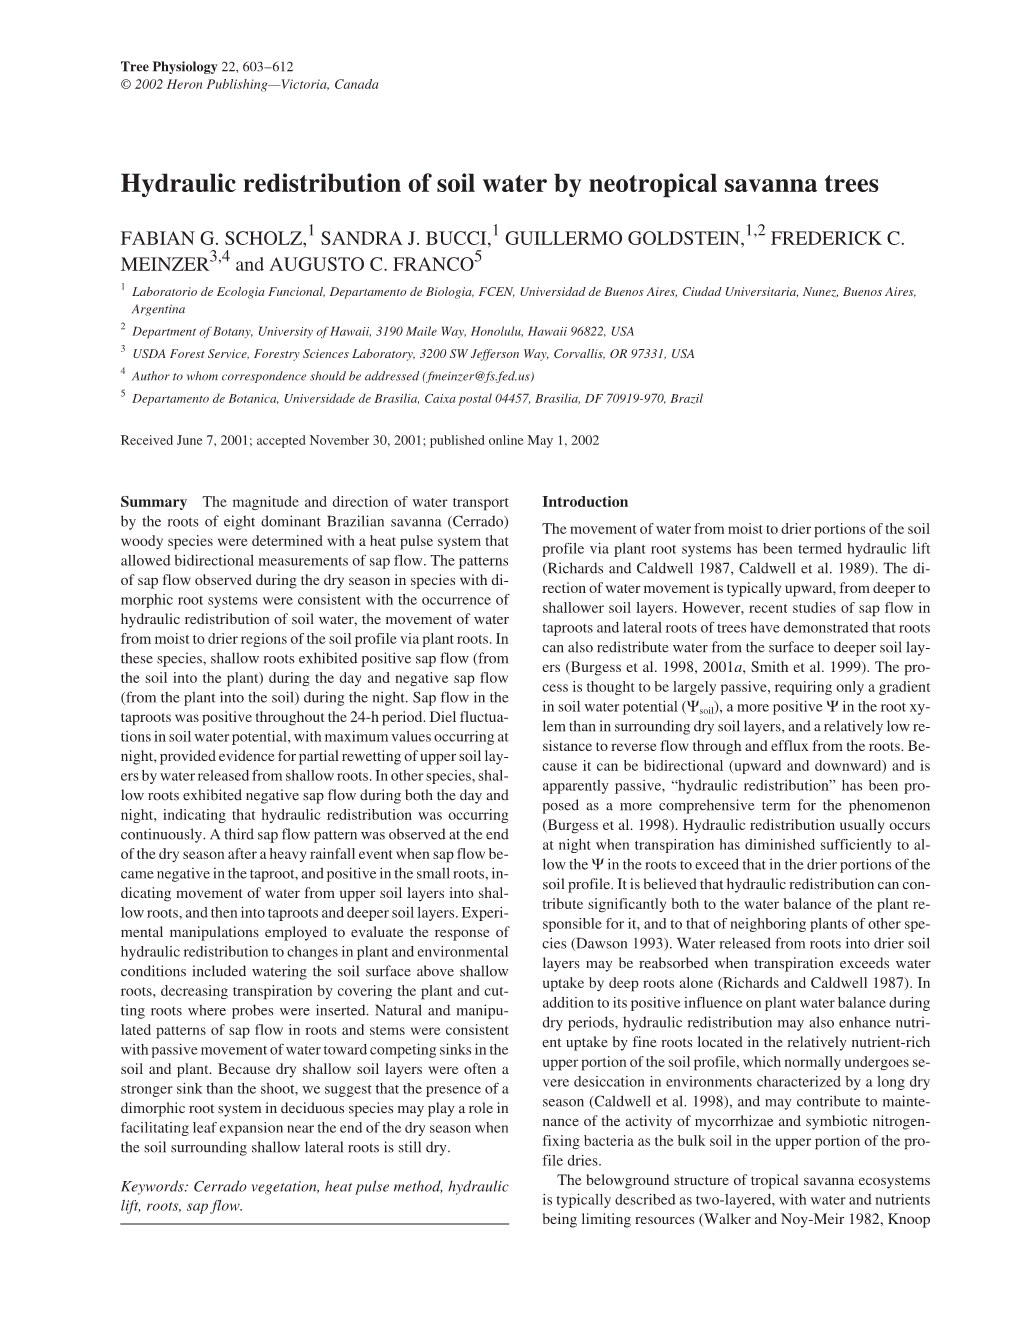 Hydraulic Redistribution of Soil Water by Neotropical Savanna Trees